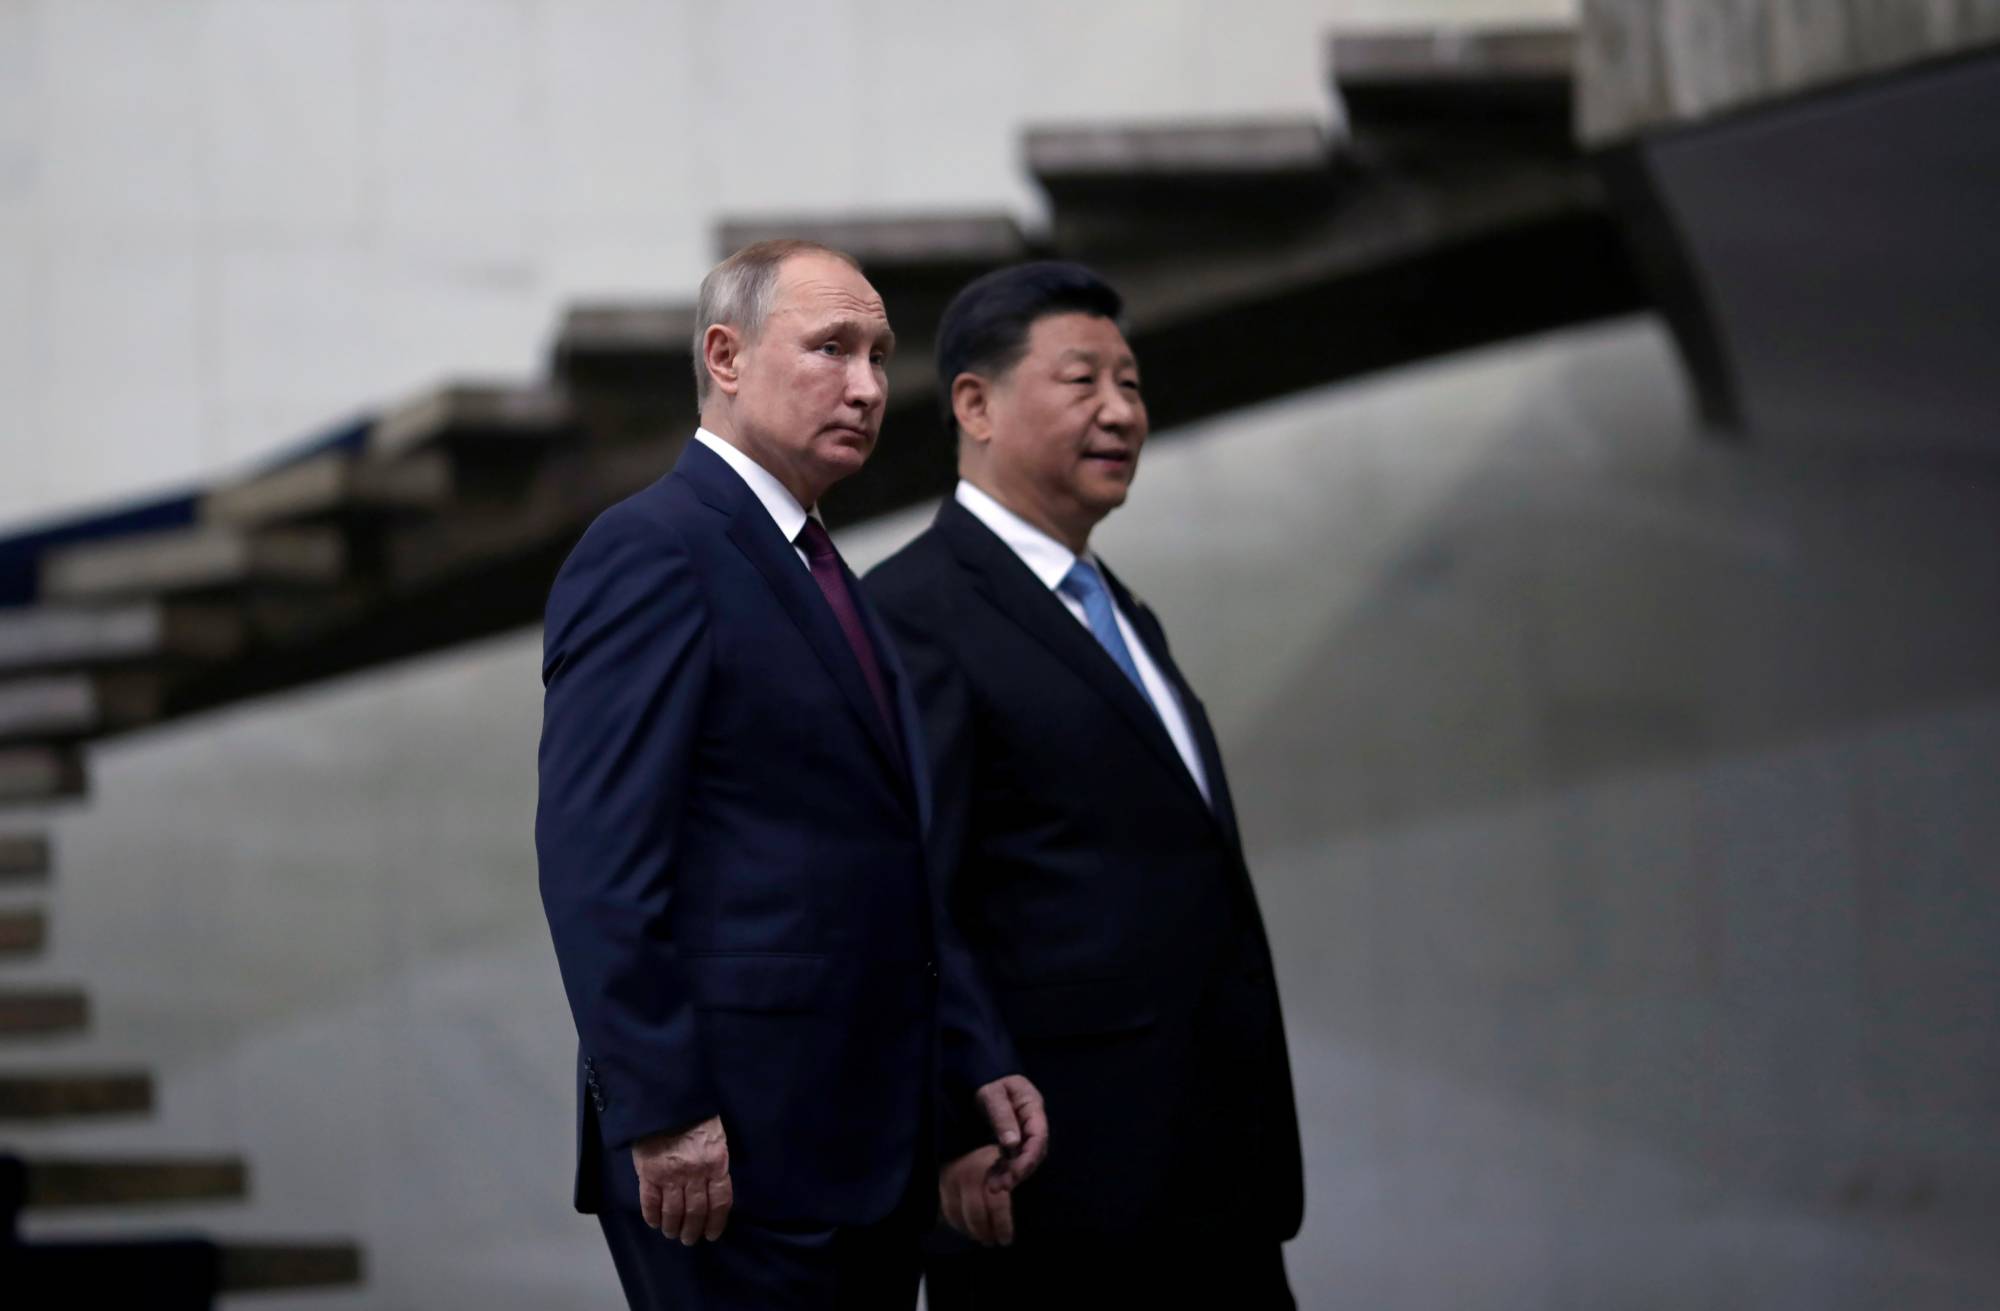 When Russian President Vladimir Putin prepares to meet Chinese leader Xi Jinping later this week in Uzbekistan, the two are expected to make bold claims on the strength of their countries’ partnership. But beyond lip service, it is unclear whether the summit will yield any substantial gains for Moscow. | REUTERS